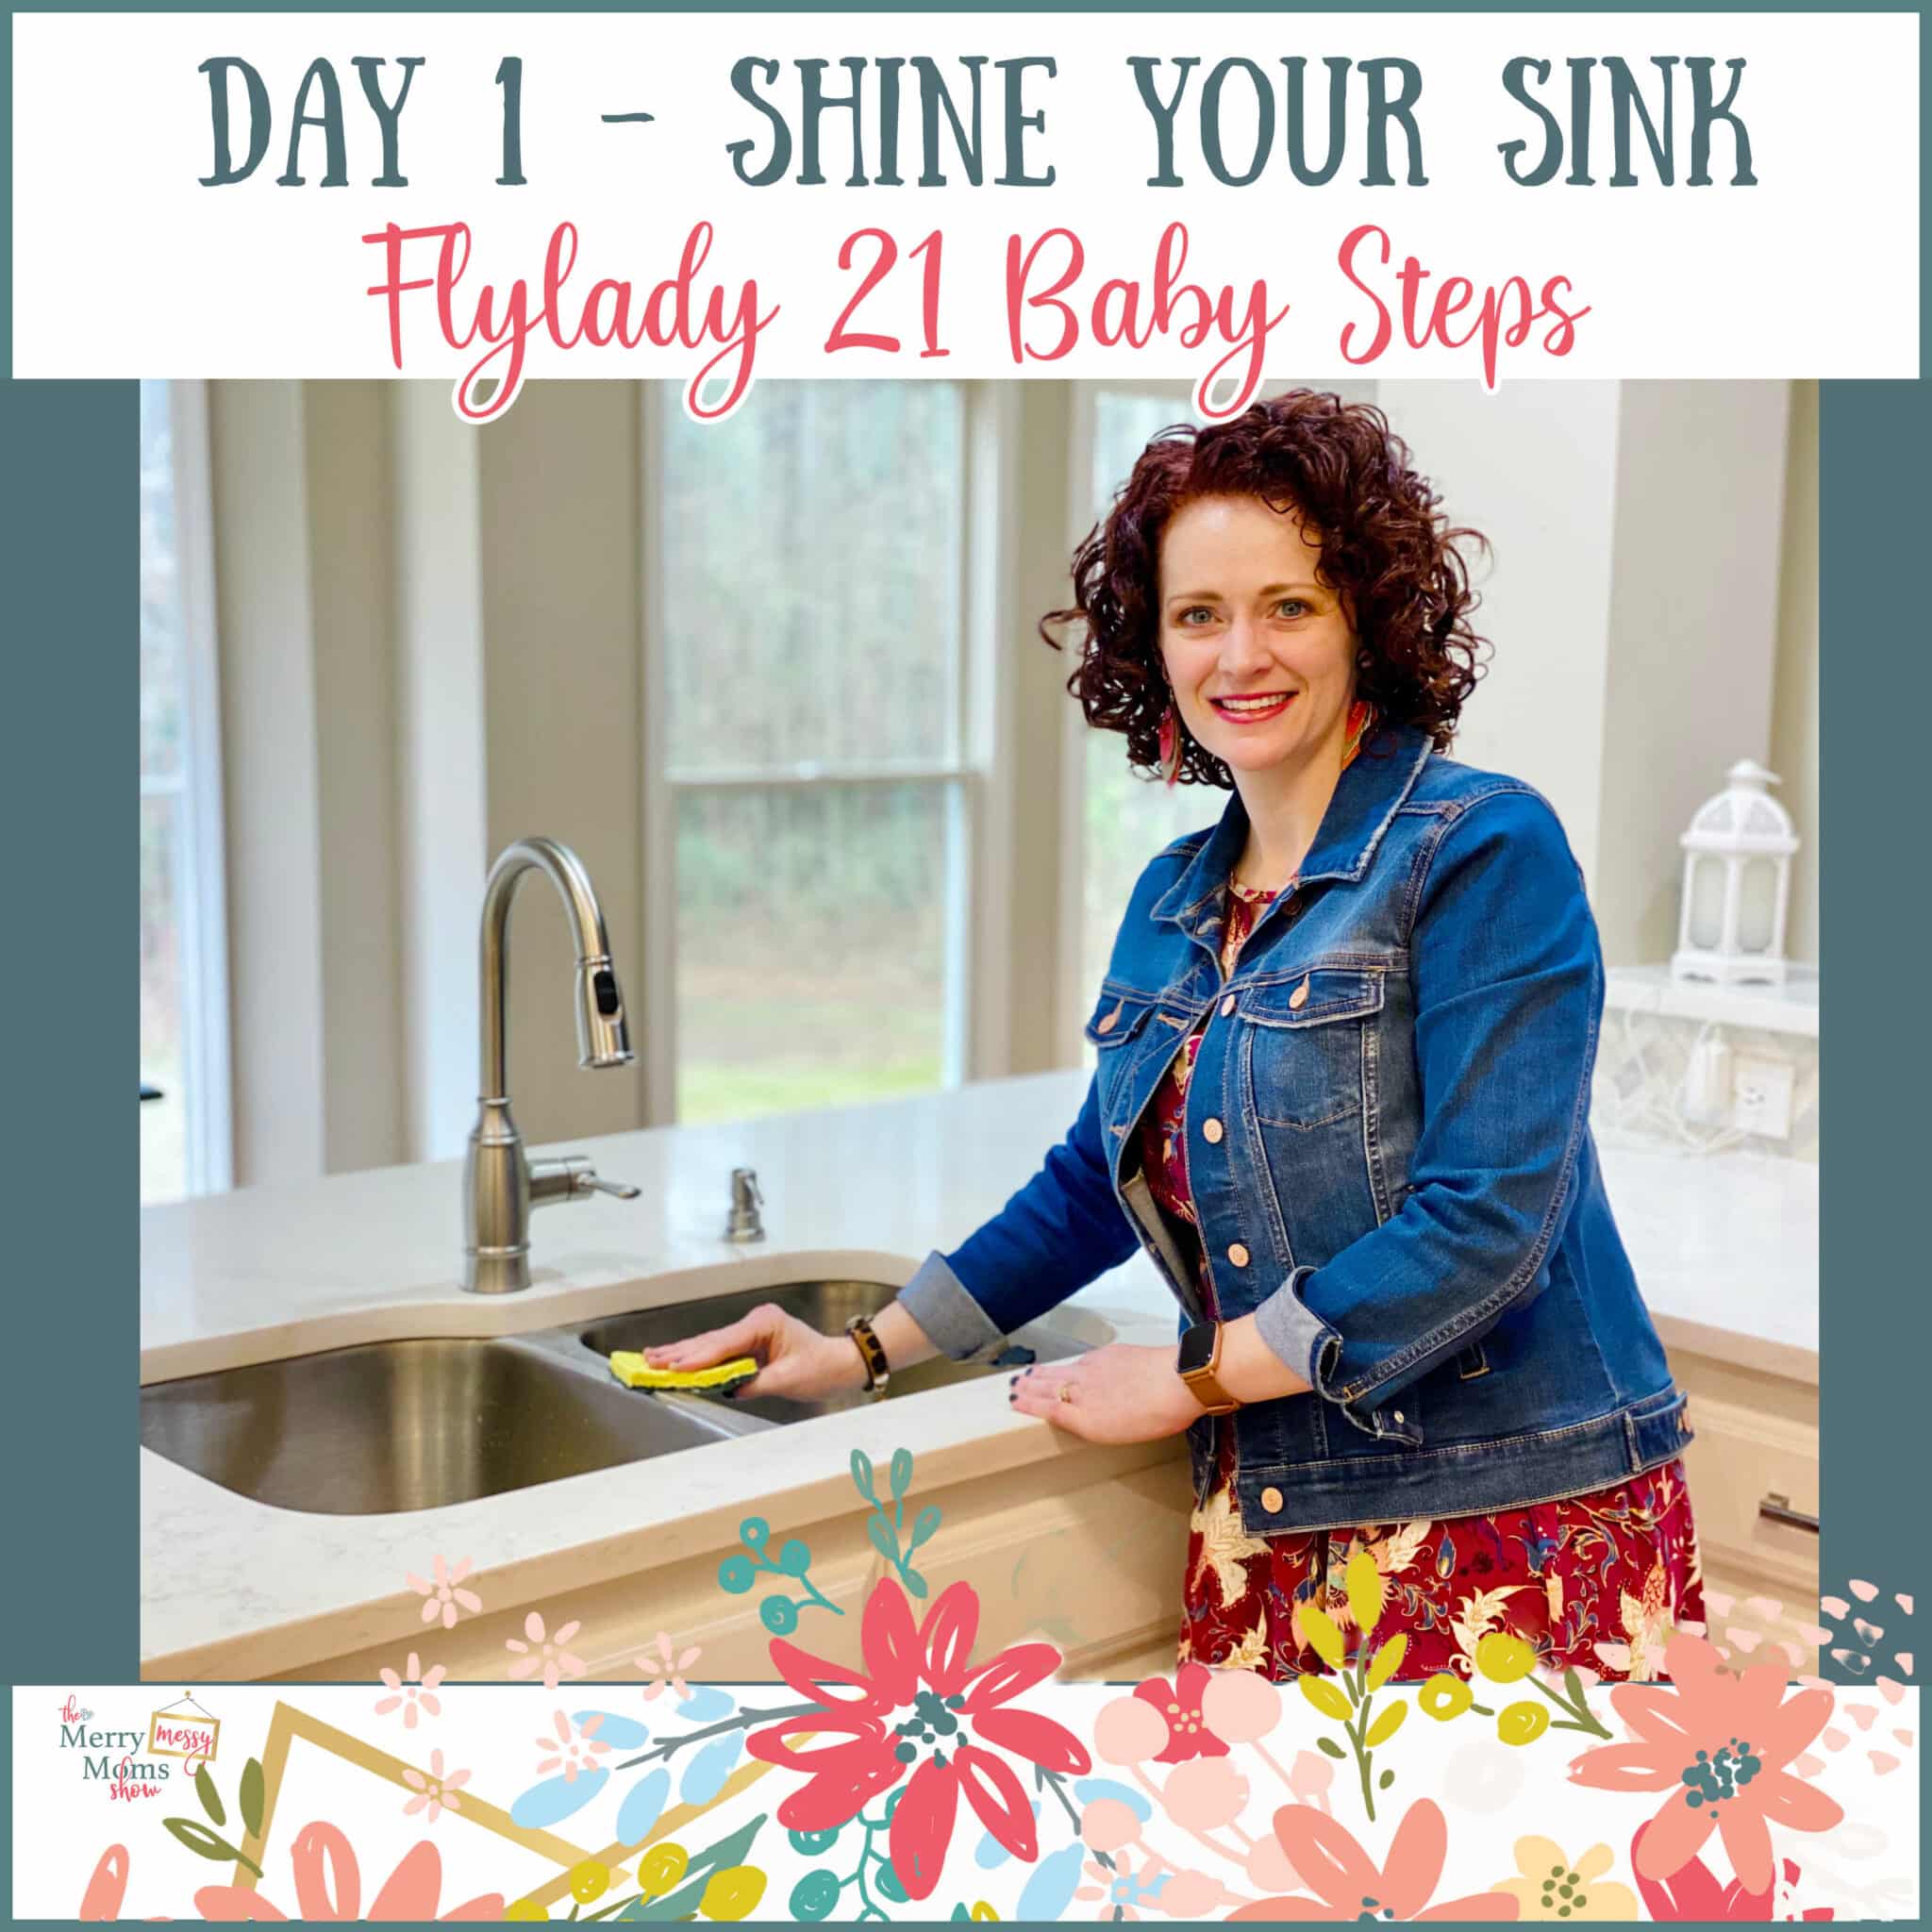 Day 1 - Shine Your Sink - Flylady 21 Baby Steps